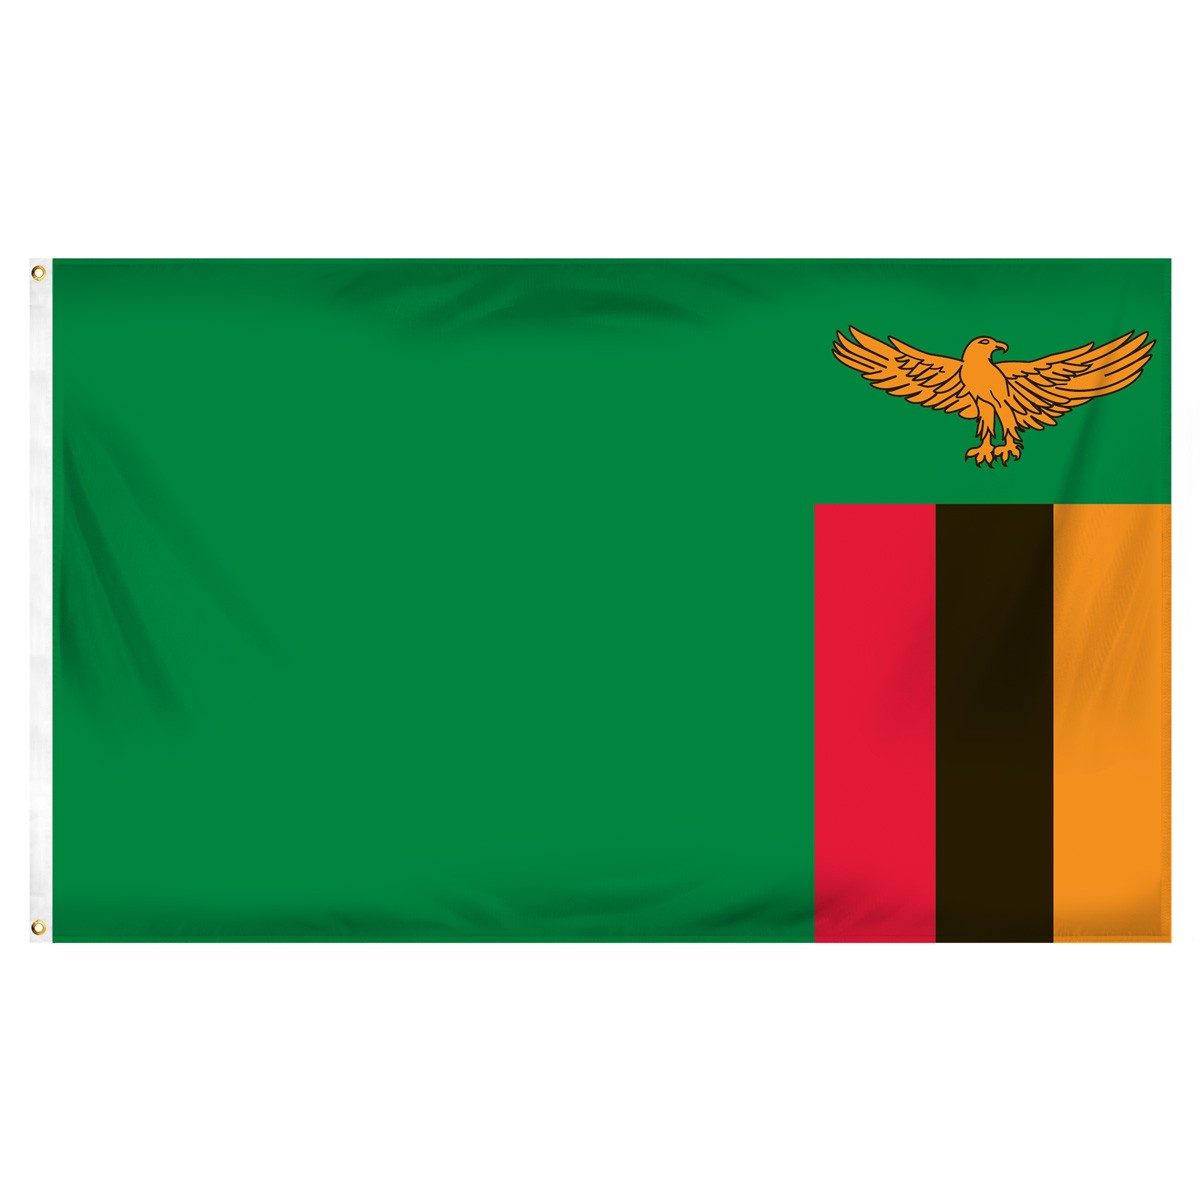 Zambia Building Pennants and Flags